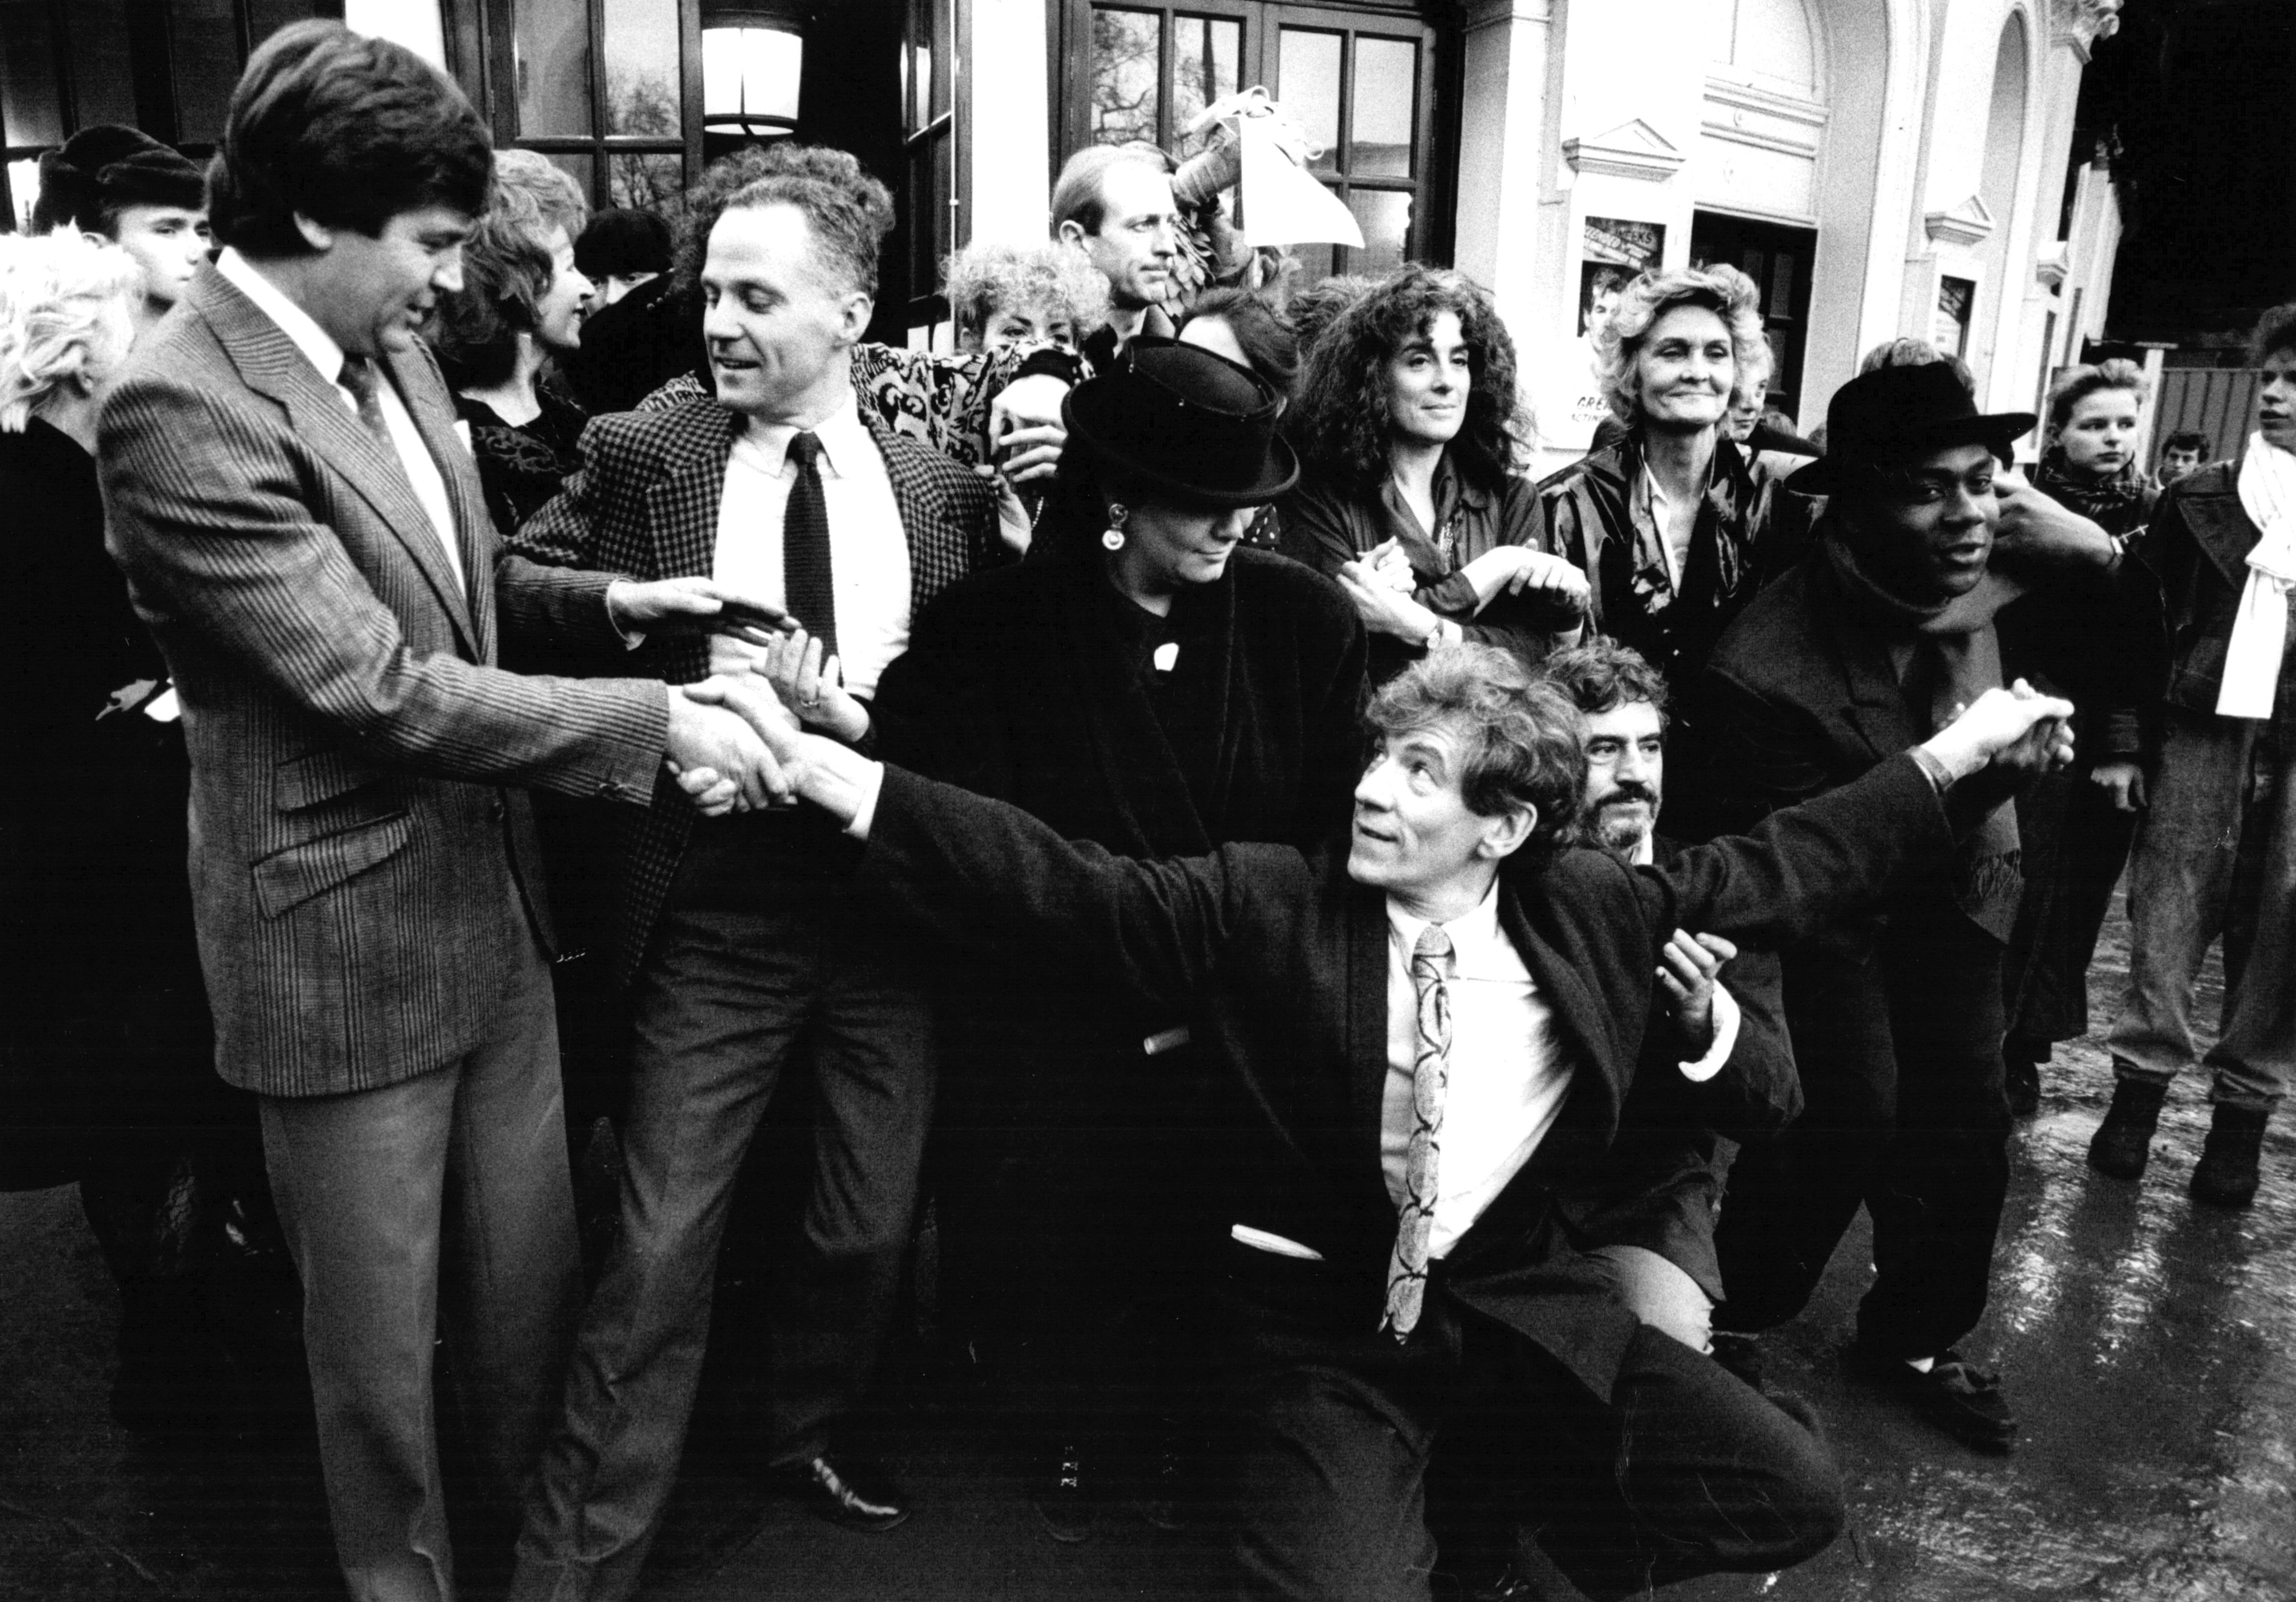 Stop Clause 28 campaigners at the Playhouse Theatre in 1988. To buy this print, click here